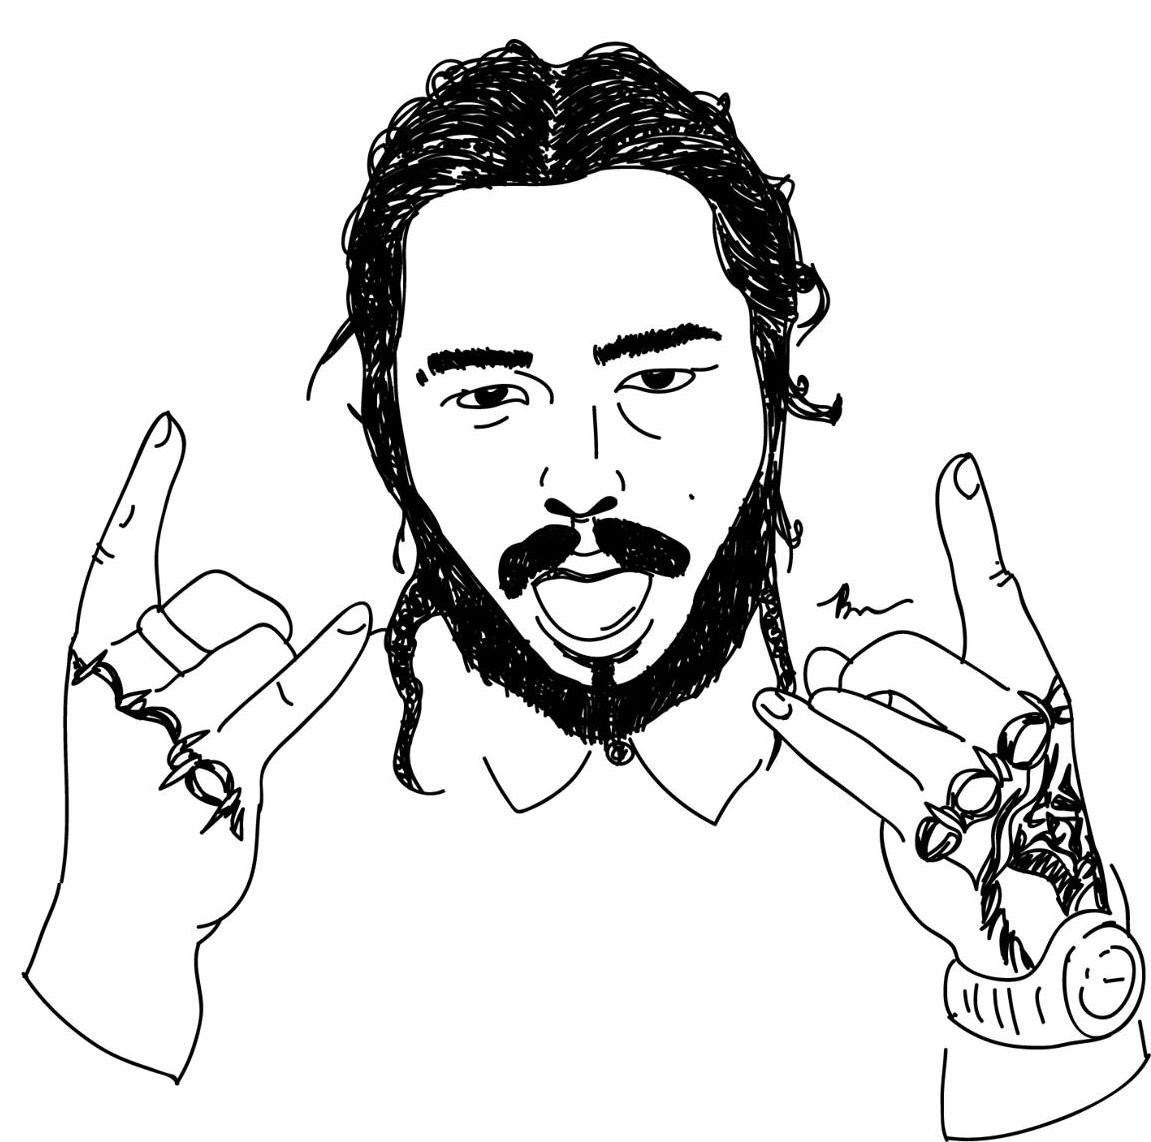 Coloring Sheets For Kids Post Malone Free
 Love digital drawing and Post Malone Tweet added by Bri